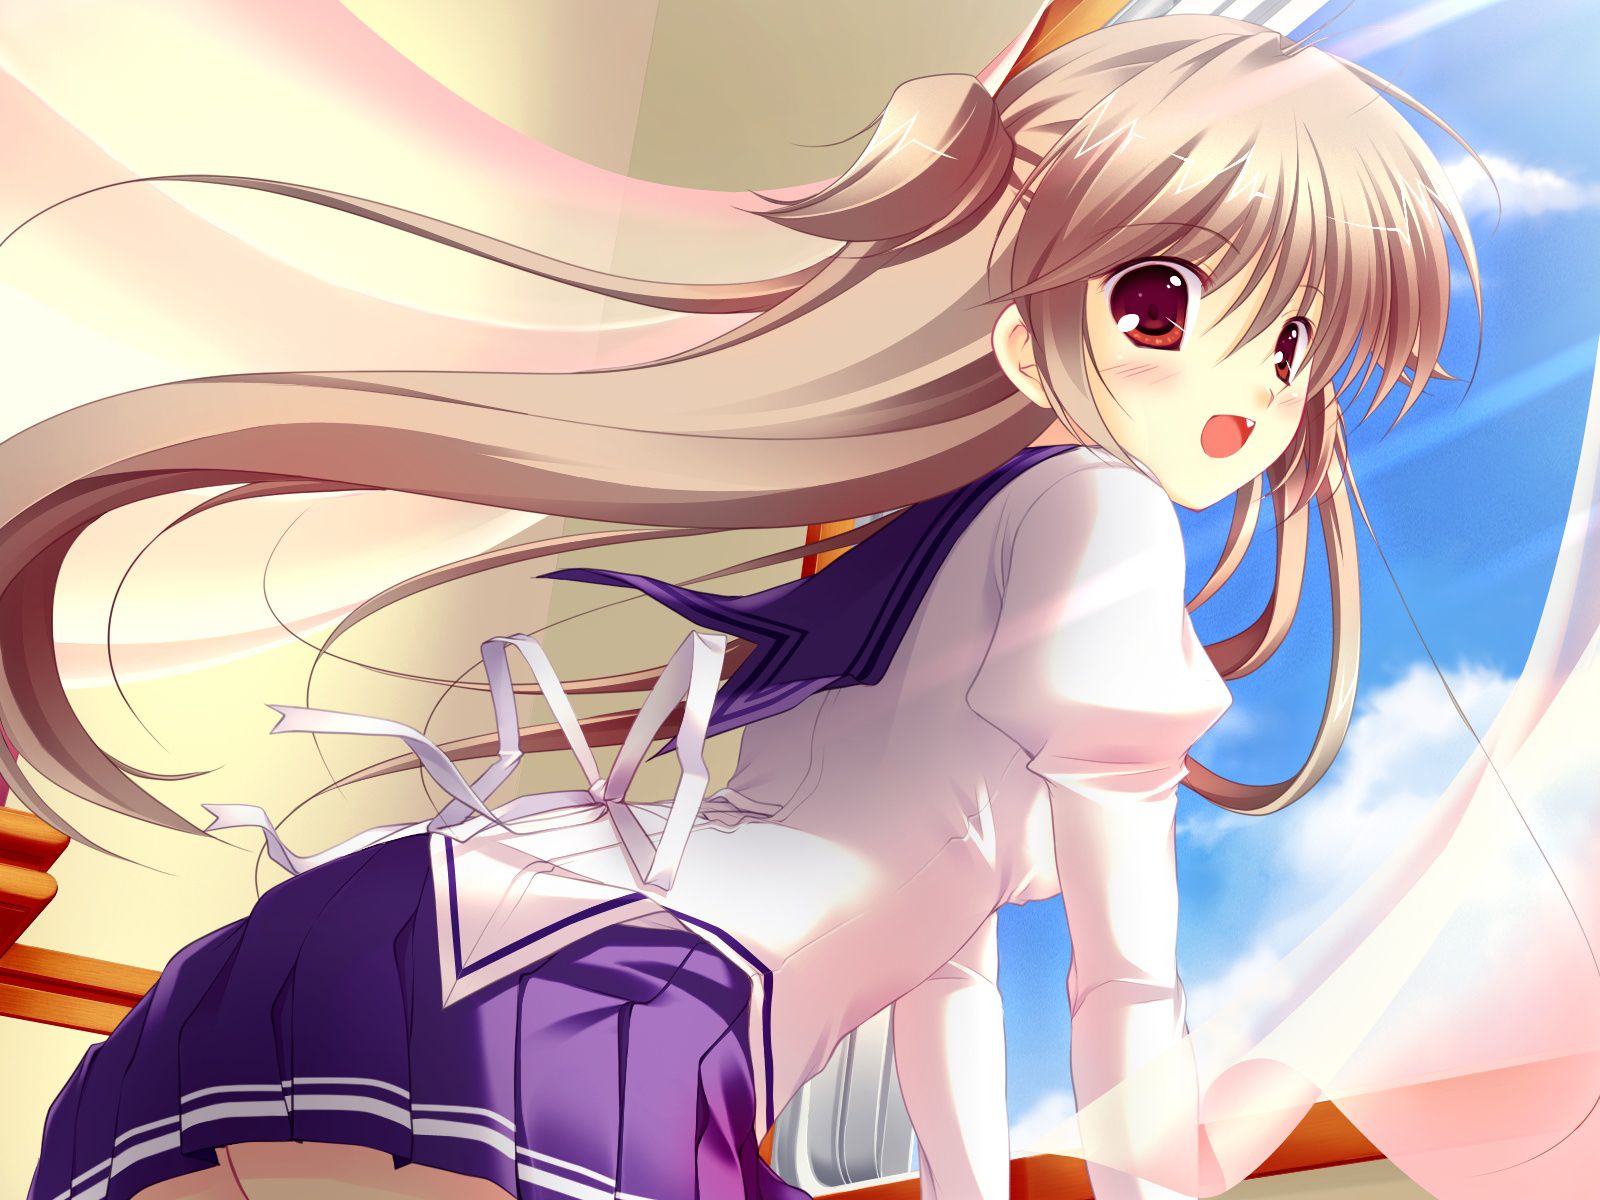 Nanairo routes [18 PC Bishoujo game CG] erotic wallpapers and pictures part 1 1